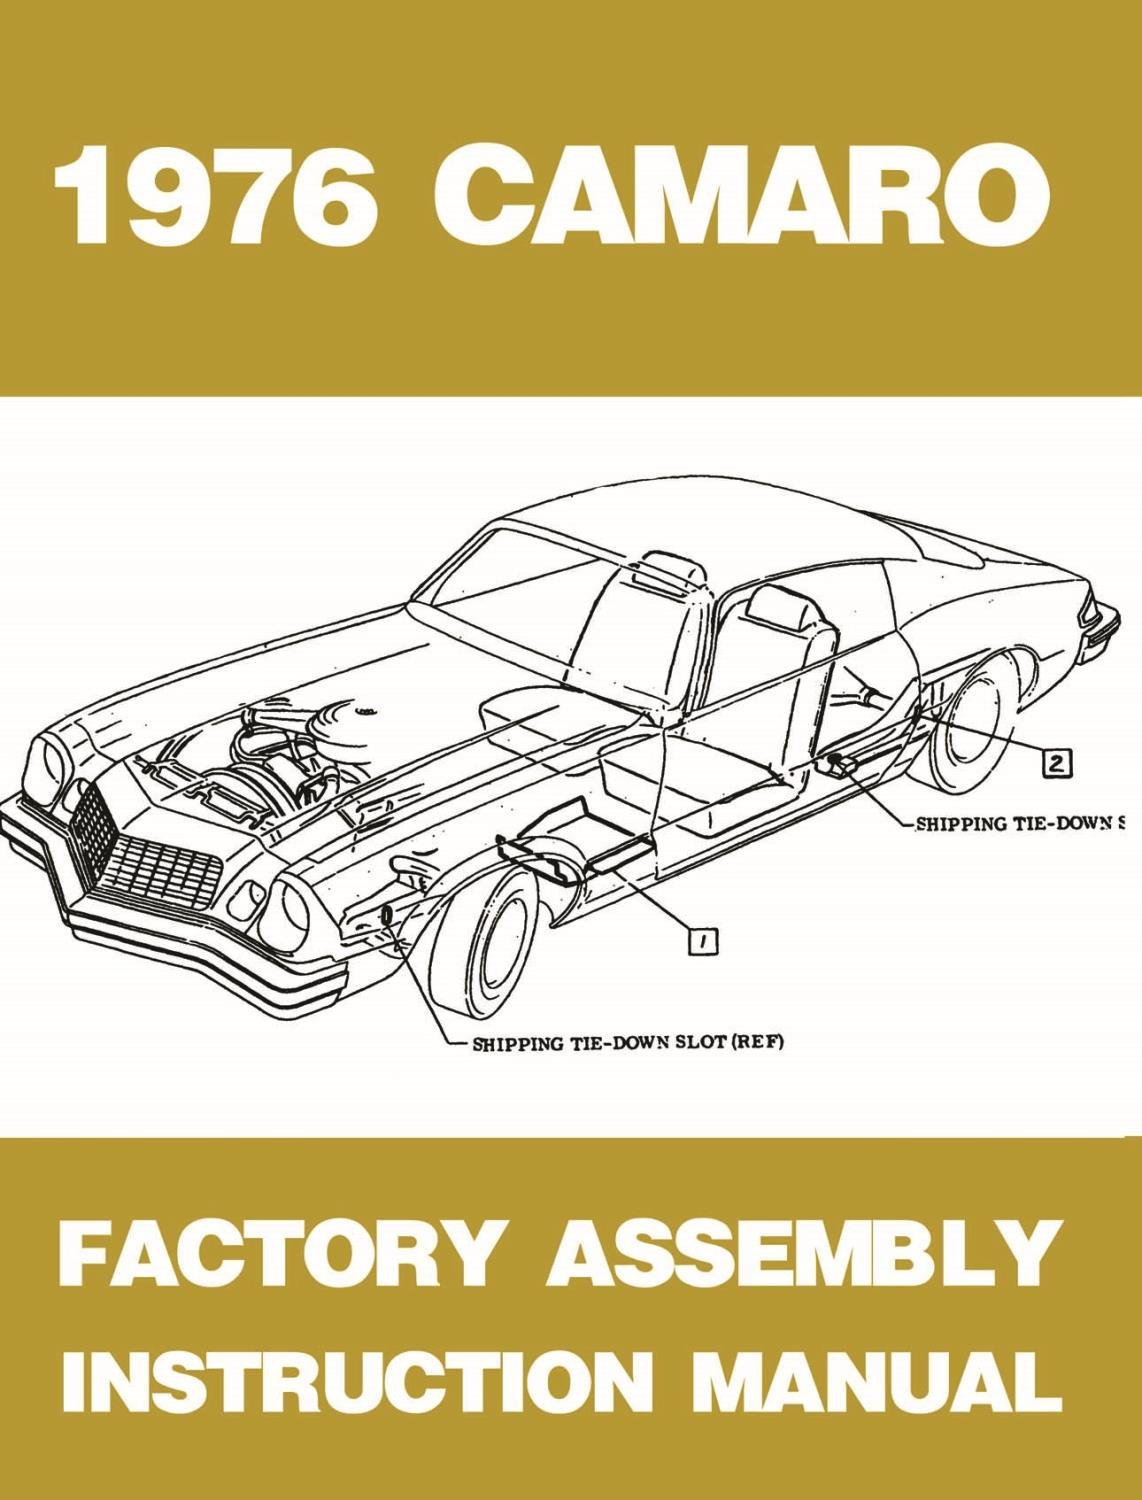 Factory Assembly Instruction Manual for 1976 Chevrolet Camaro